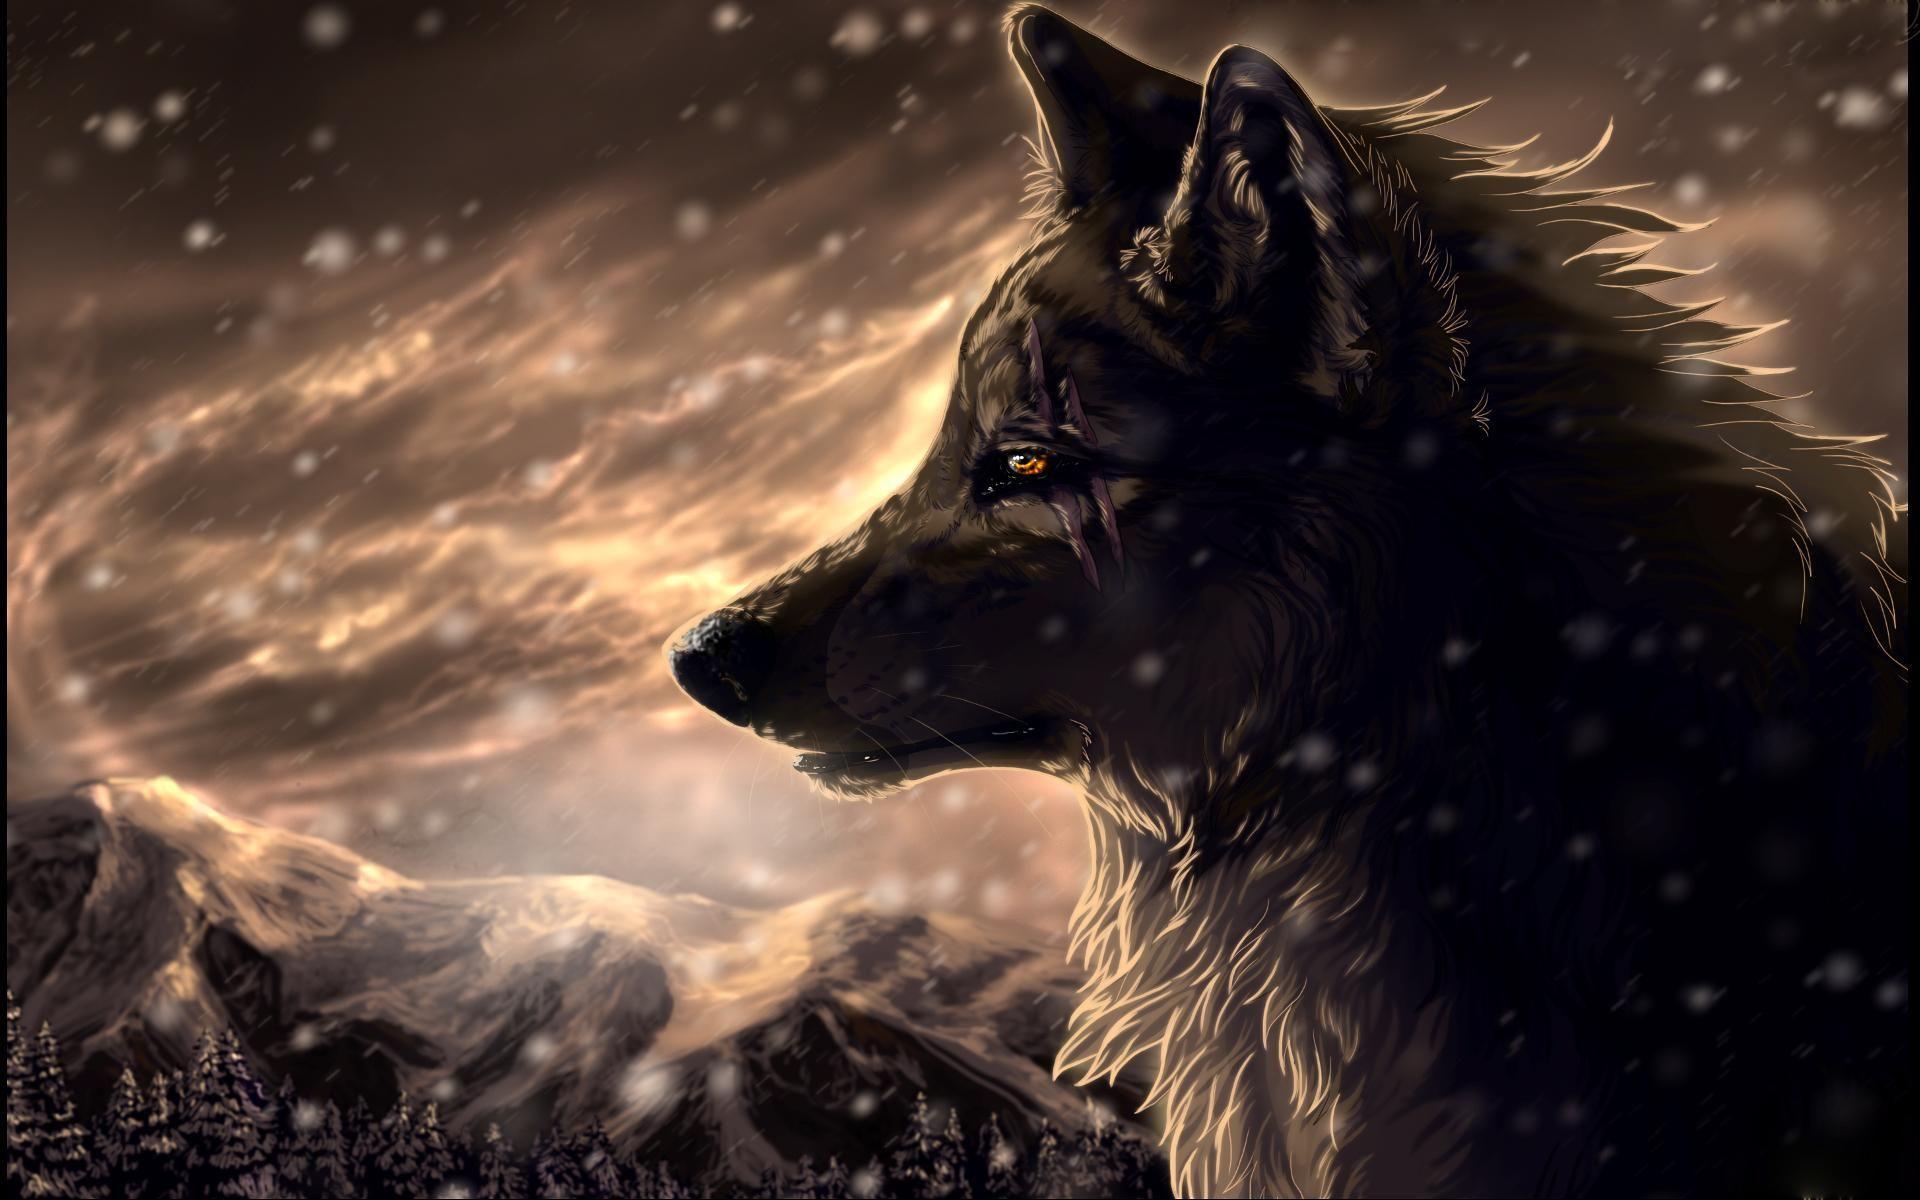 Epic Fantasy Wallpaper Mobile. Wolf wallpaper, Fantasy wolf, Wolf image